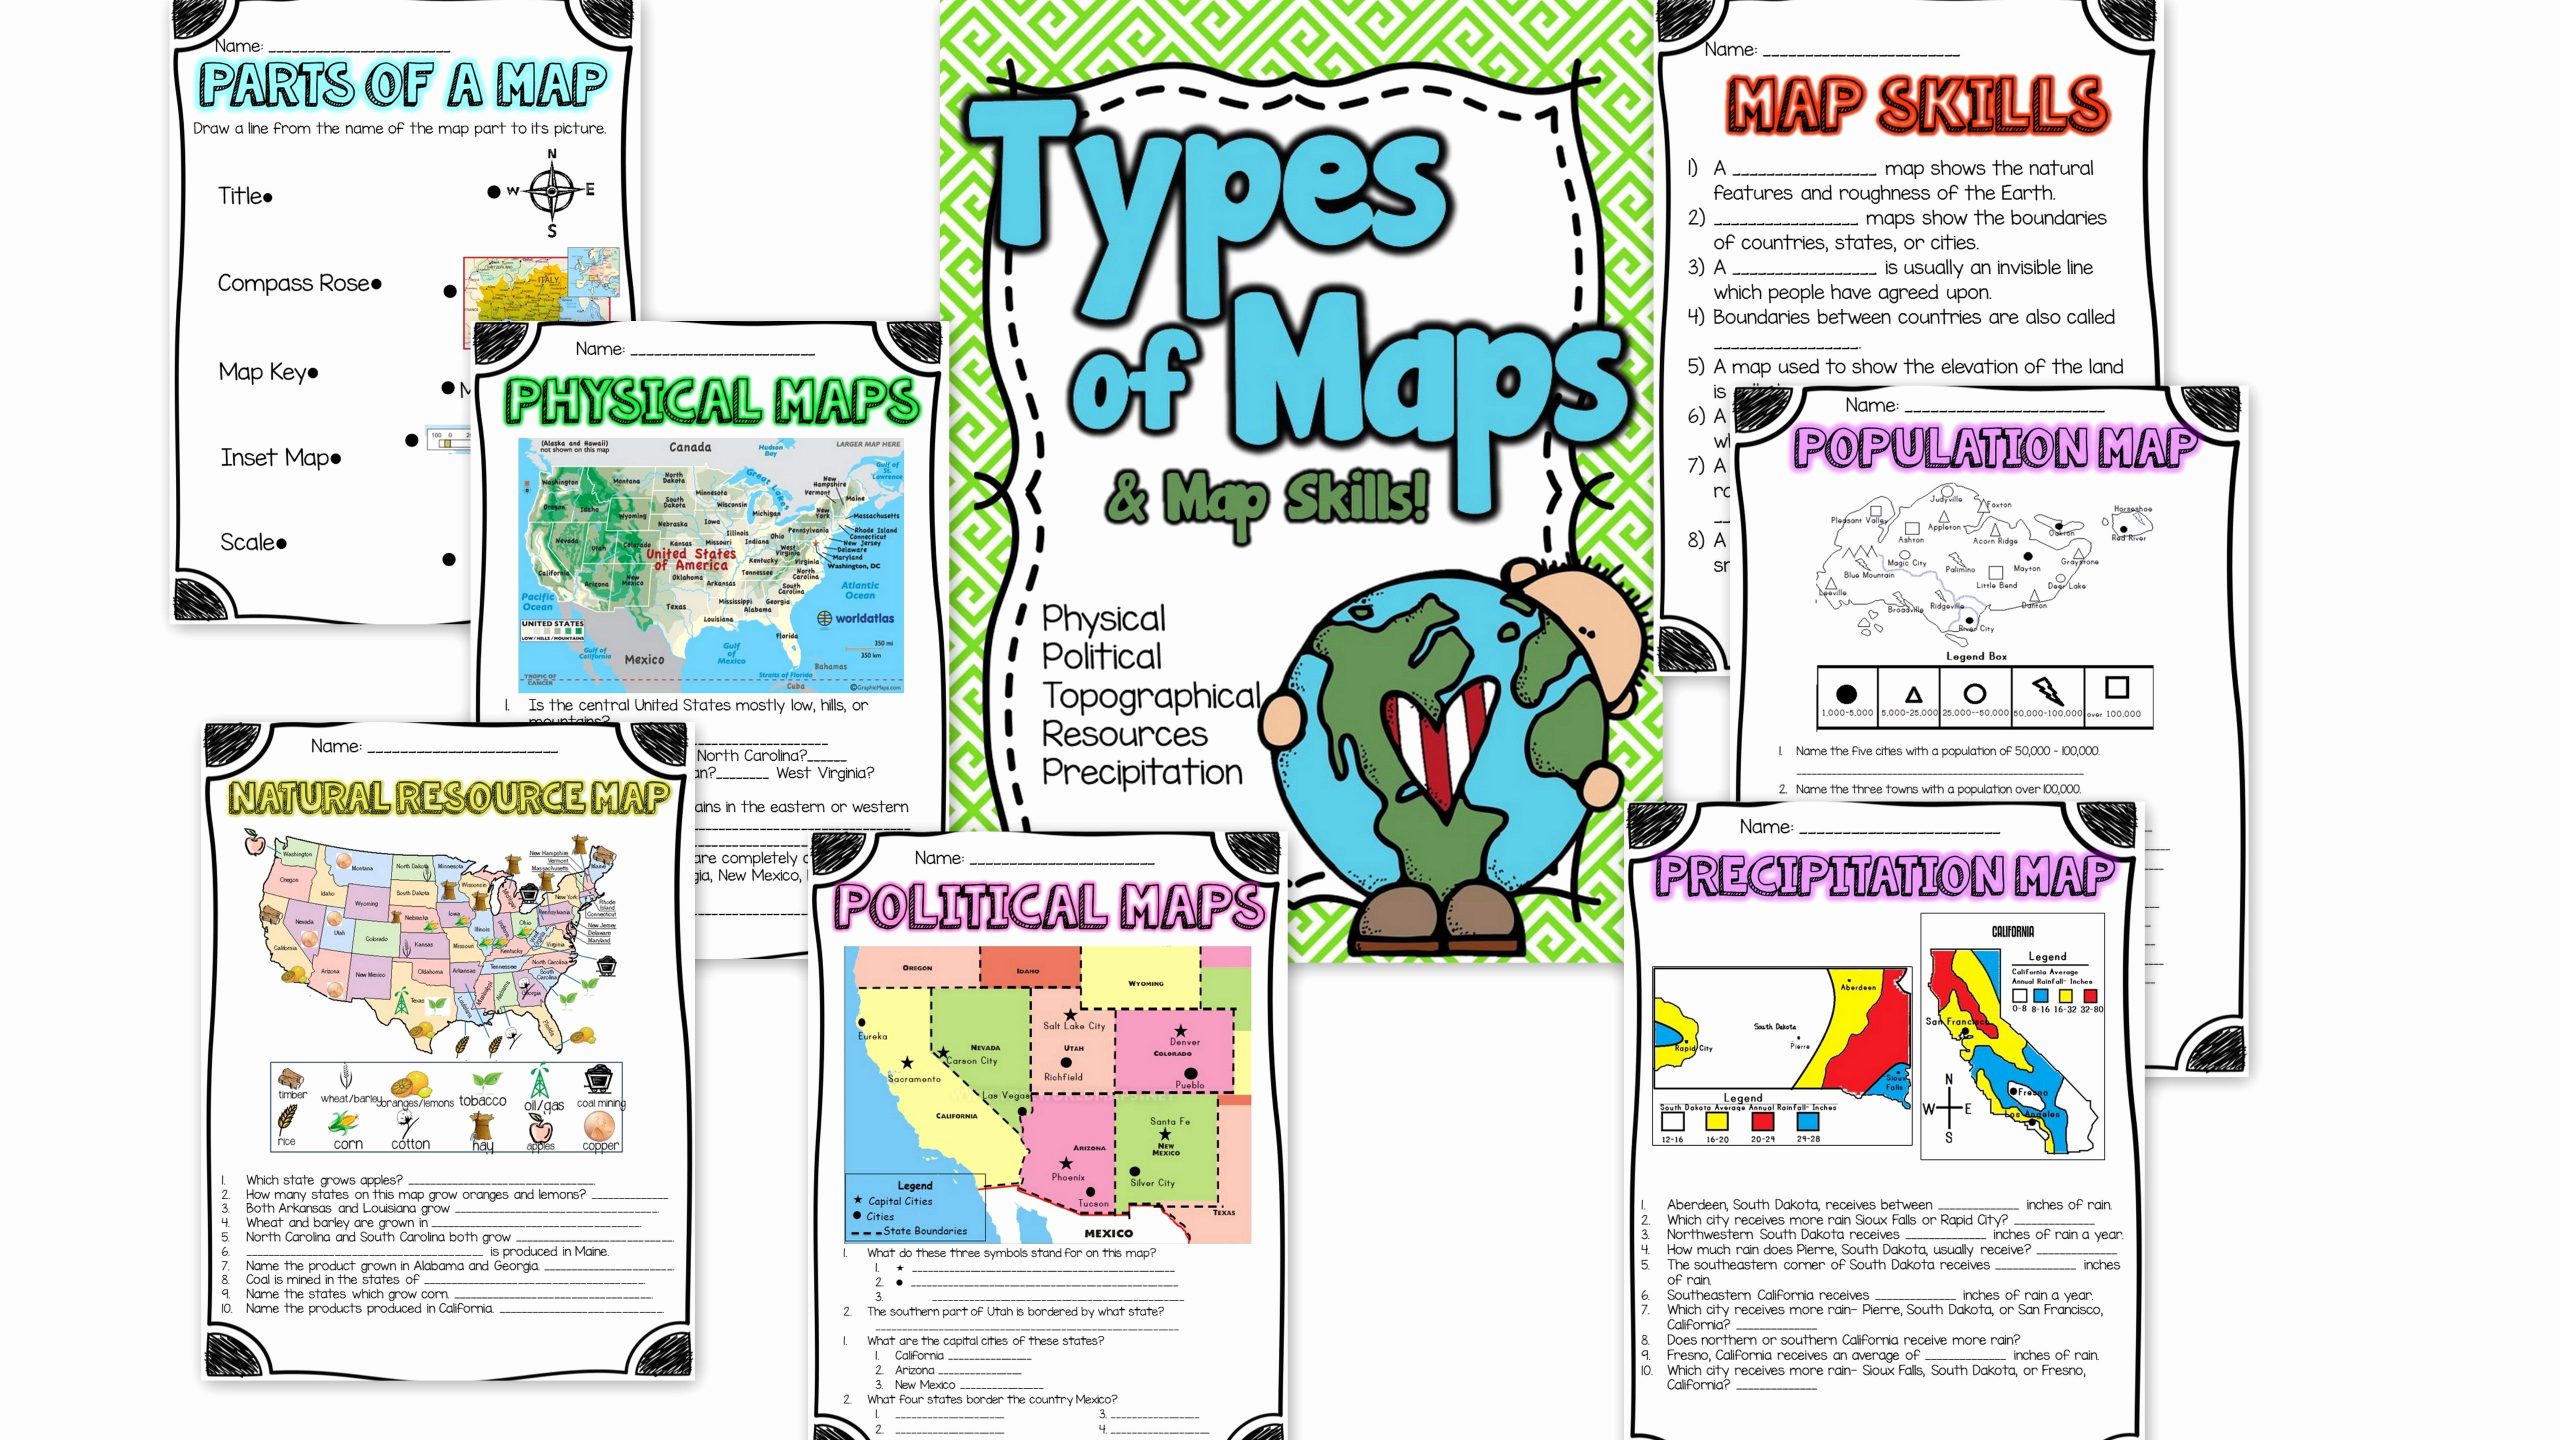 Physical and Political Maps Worksheets Luxury Types Of Maps and Map Skills Pack social Stu S Grades 2